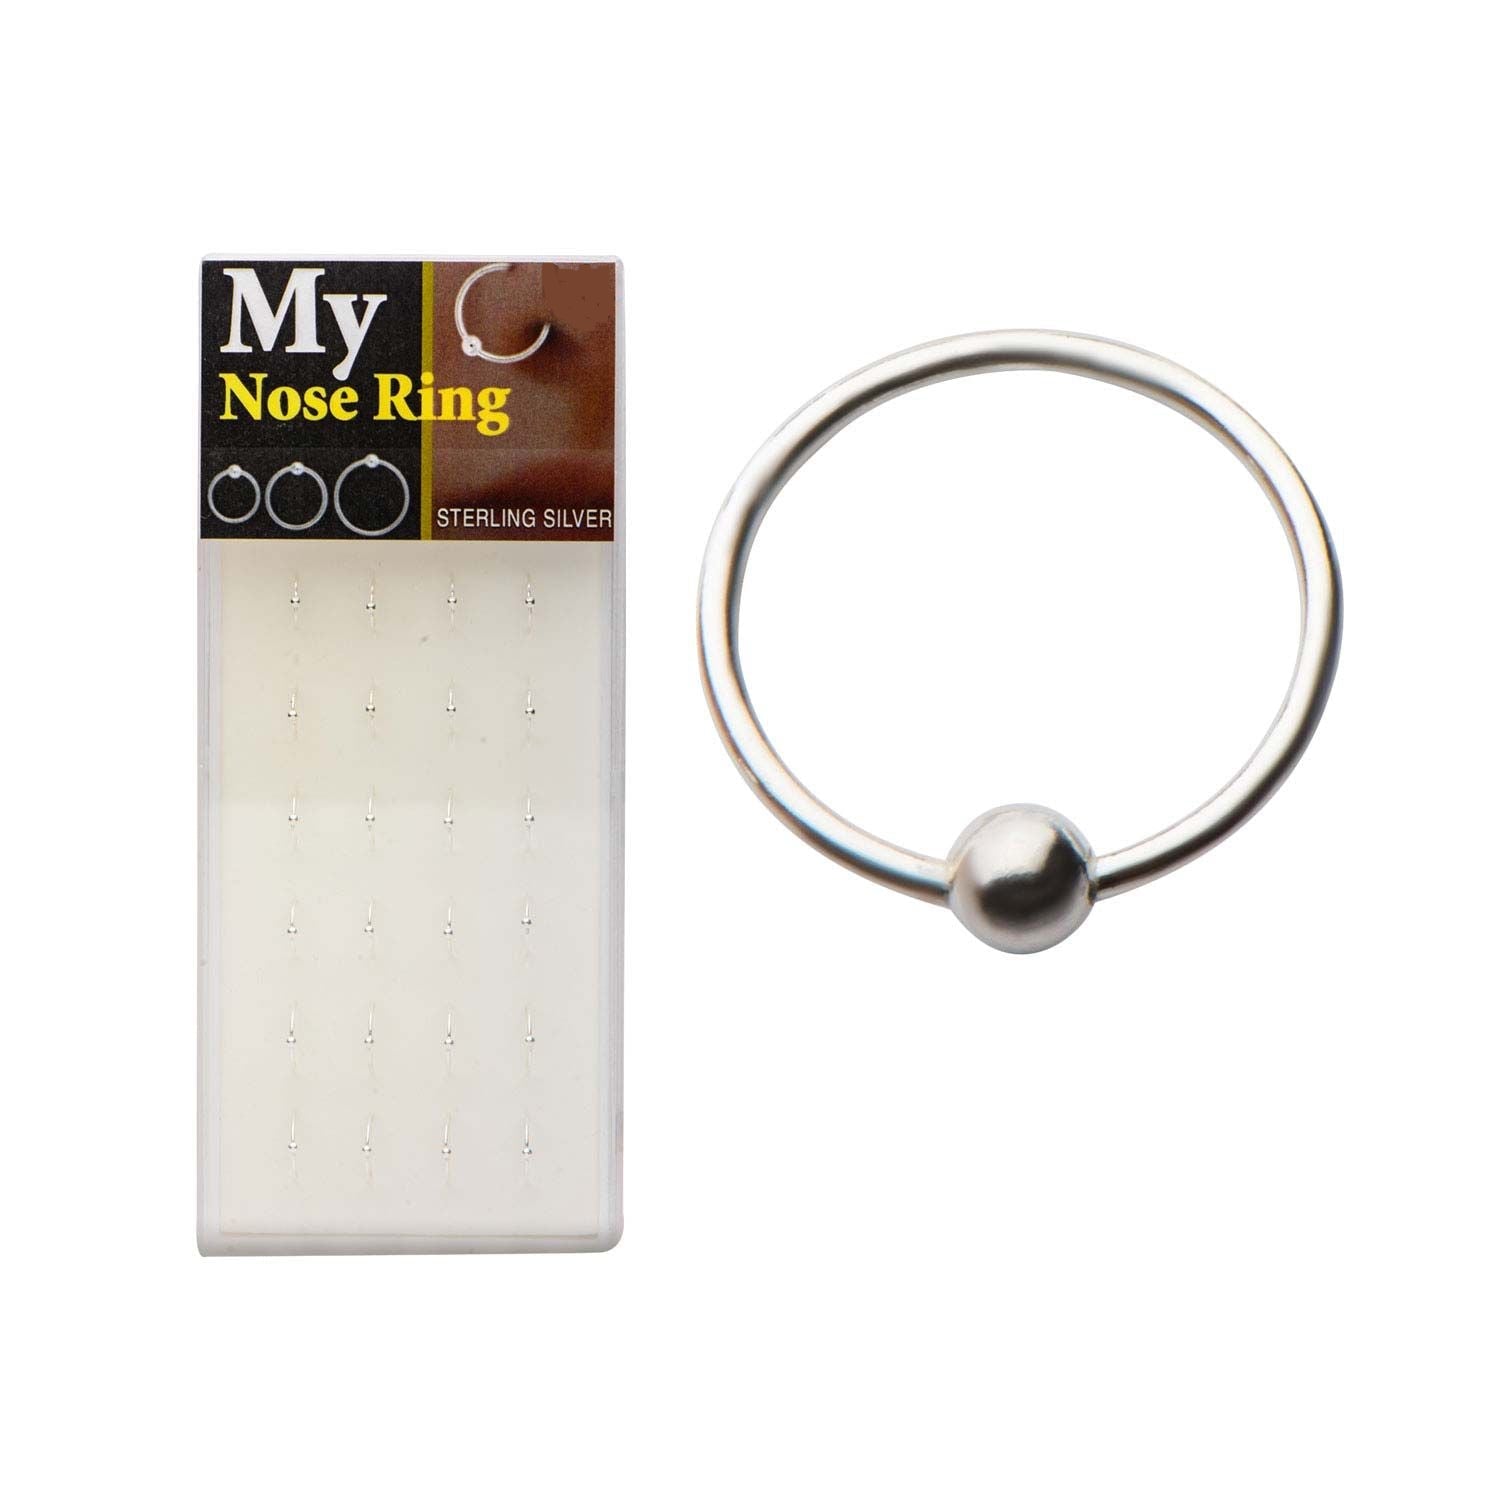 Nose Ring - Nose Hoop 22g 3 size diameters Sterling Silver Nose Jewelry - 1 Pack -Rebel Bod-RebelBod